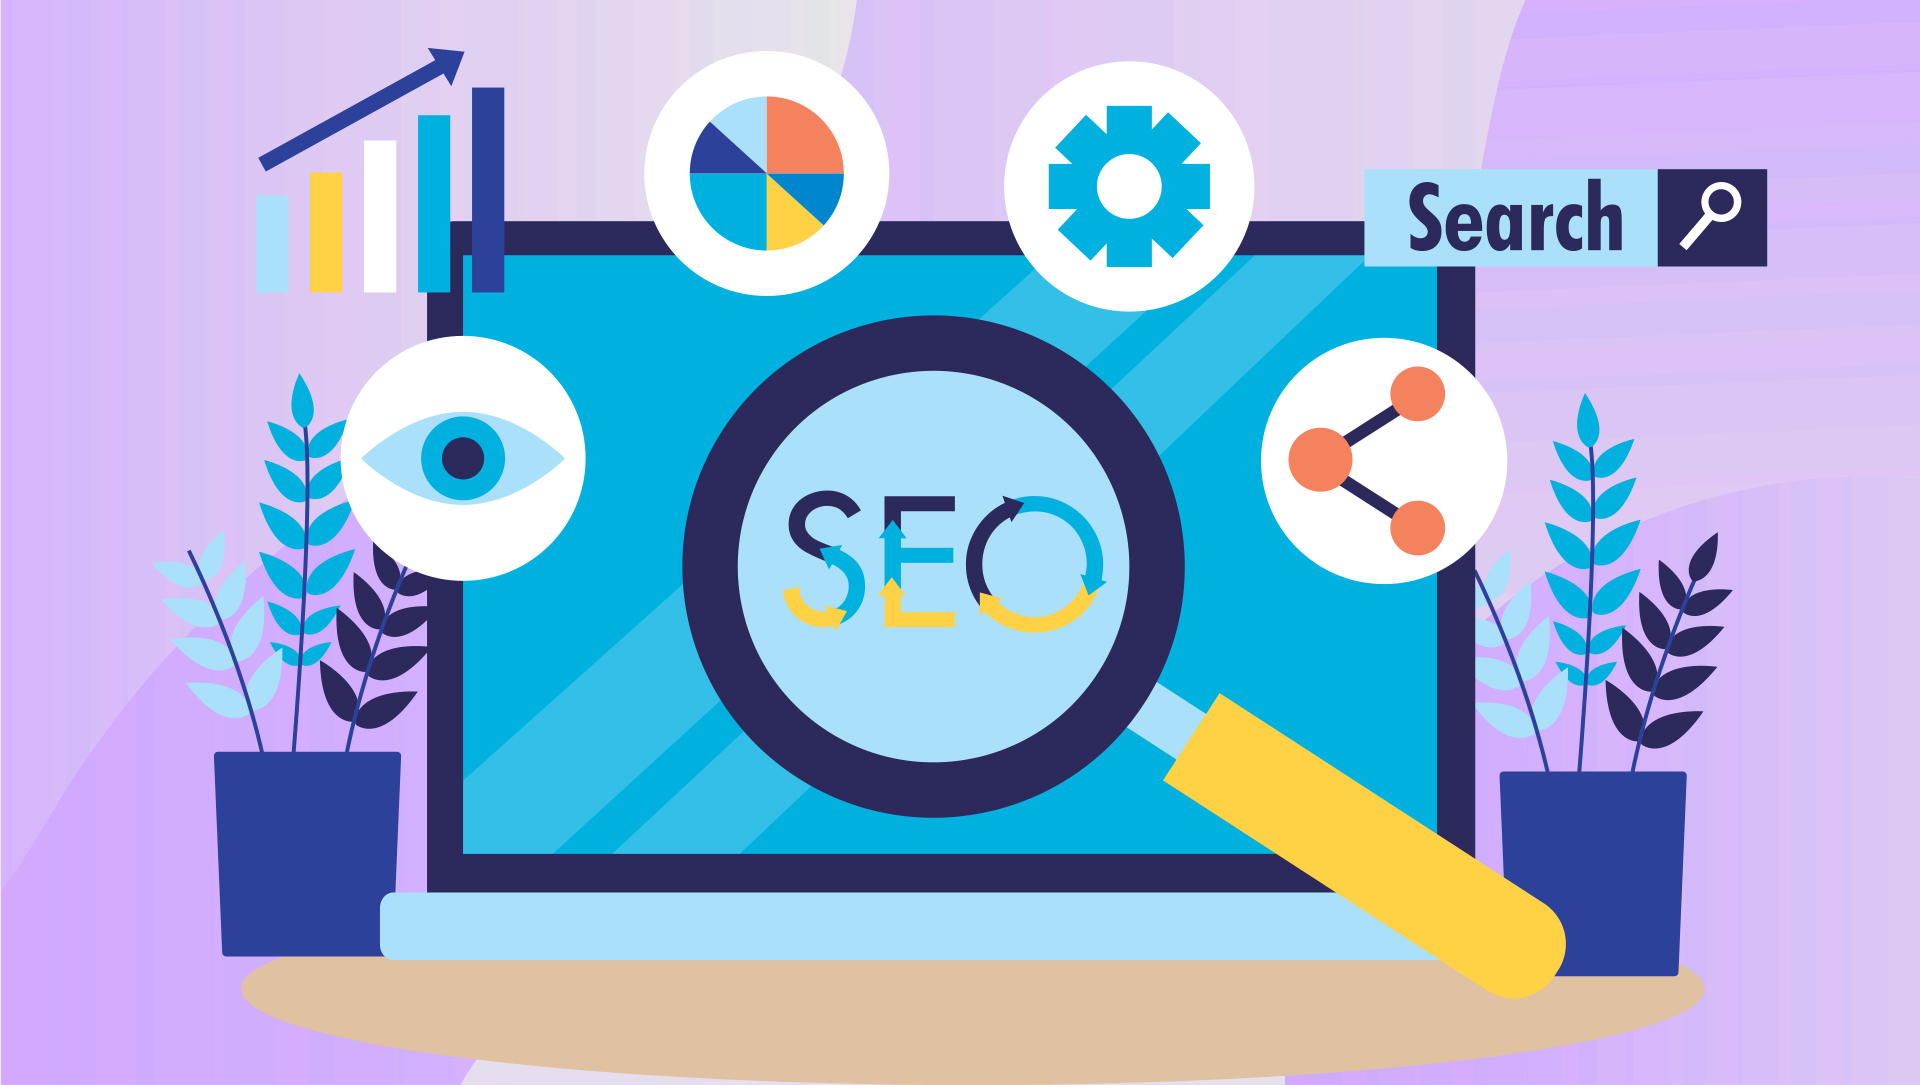 10-best-strategies-to-maximize-seo-roi-related-blog-37